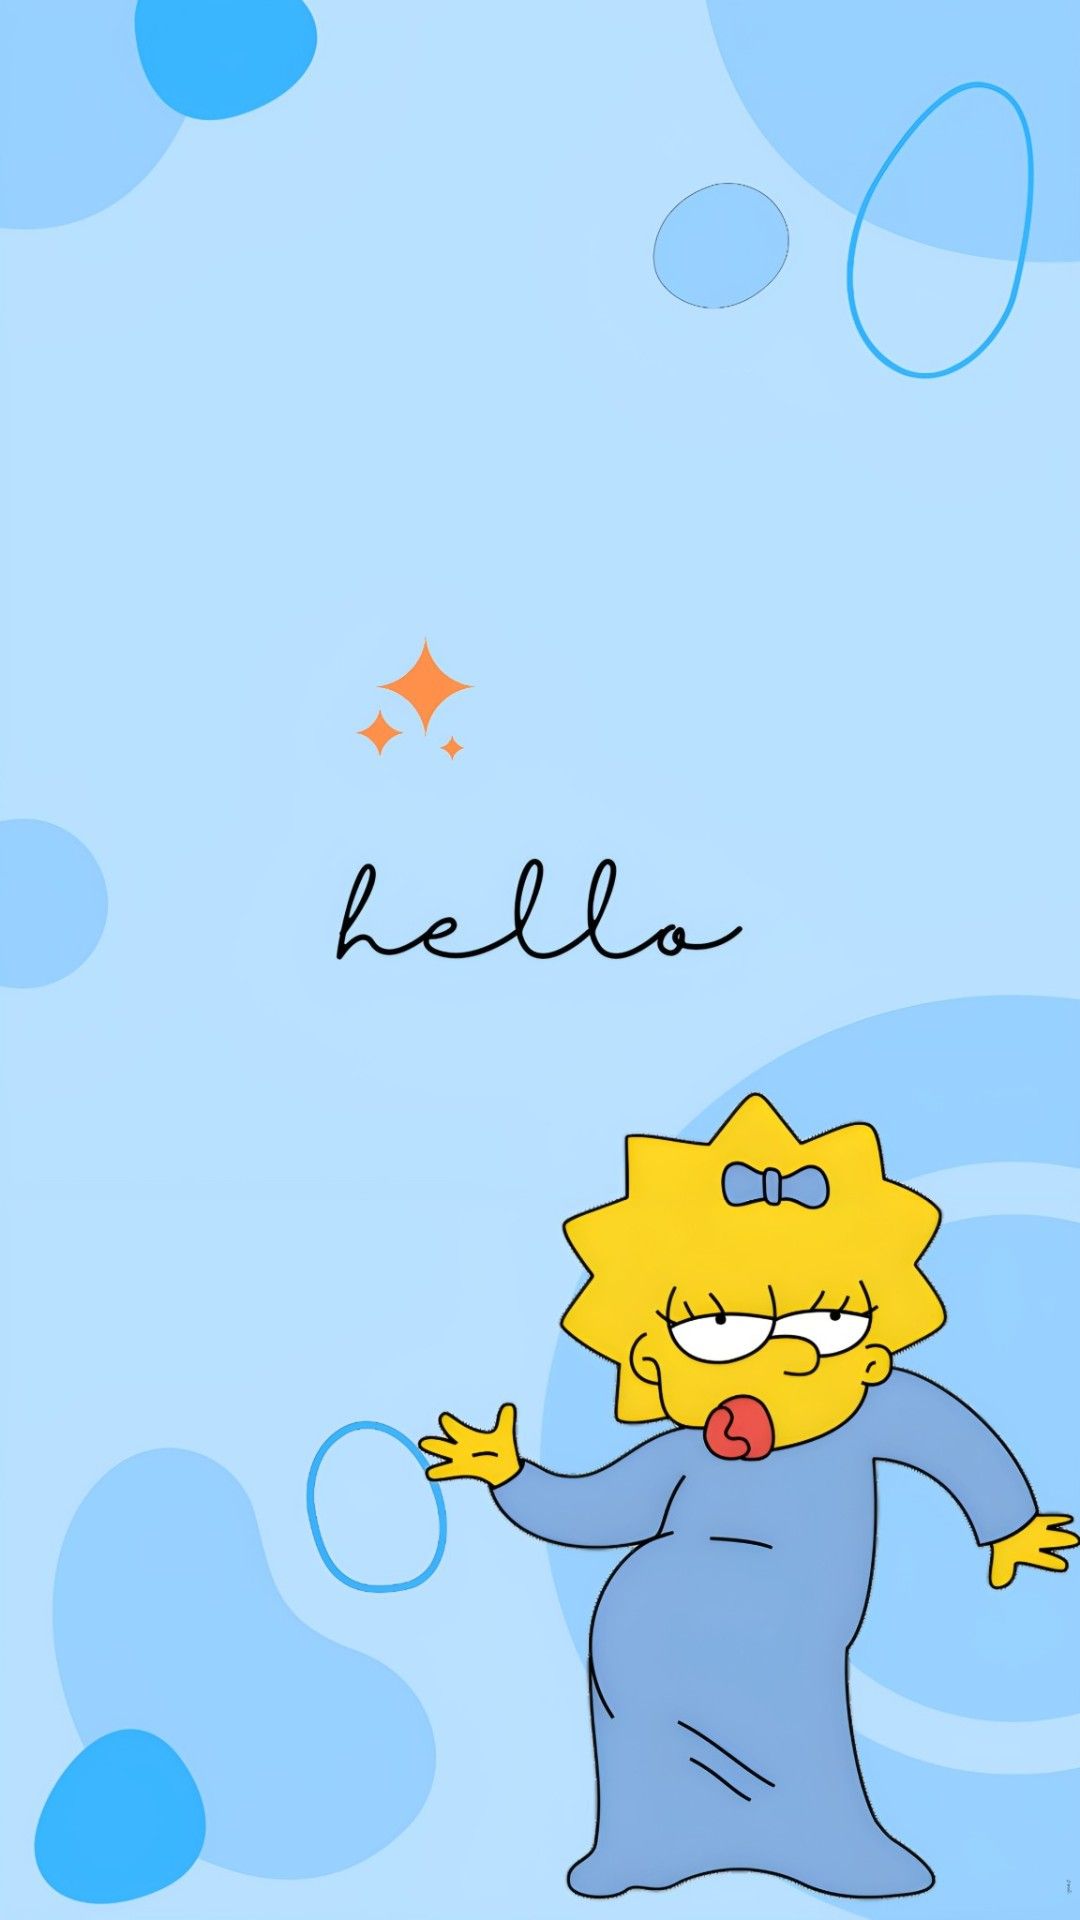 Maggie Simpson iPhone Wallpaper with high-resolution 1080x1920 pixel. You can use this wallpaper for your iPhone 5, 6, 7, 8, X, XS, XR backgrounds, Mobile Screensaver, or iPad Lock Screen - Maggie Simpson